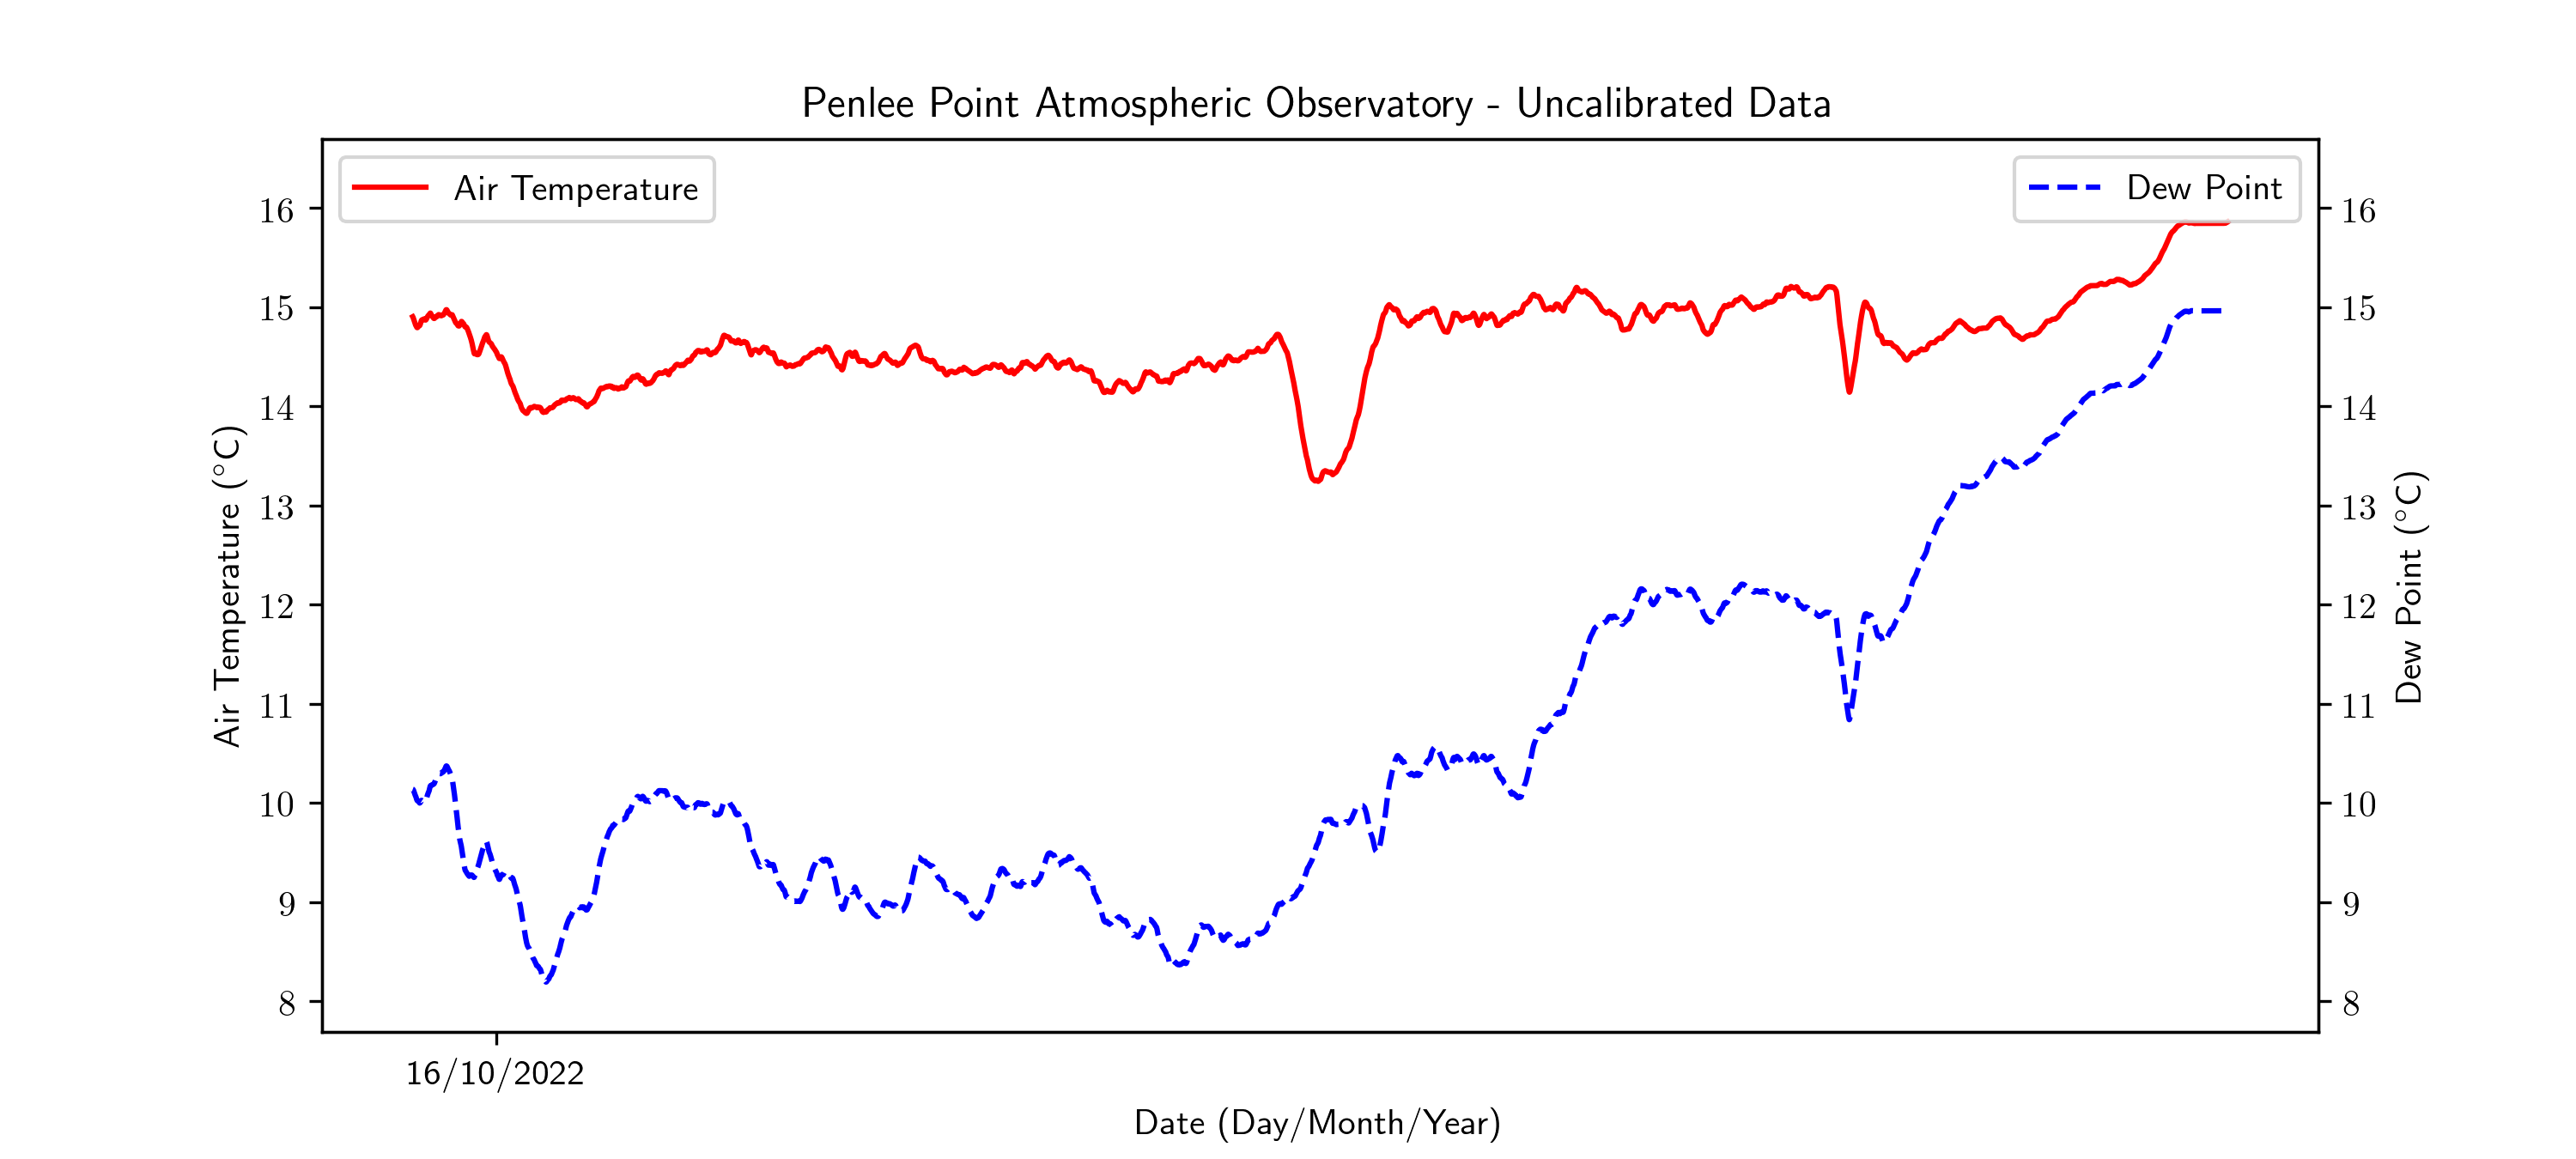 Air Temperature and Dew Point time series plot